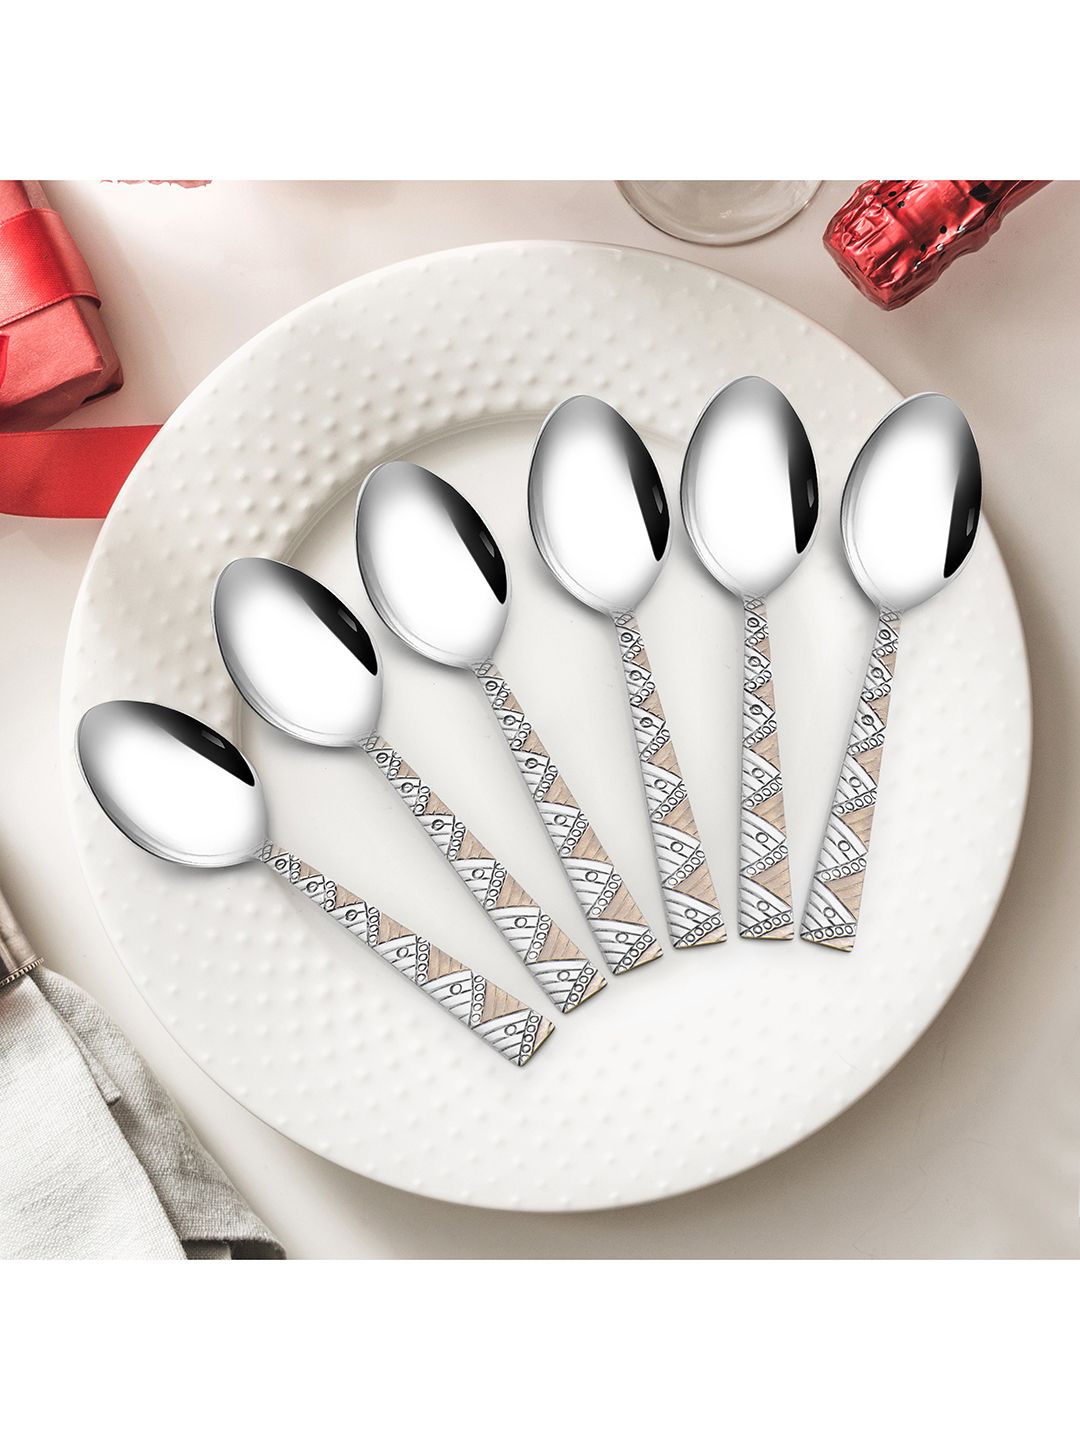 Athome by Nilkamal Silver Set Of 6 Stainless Steel Serving Spoons Price in India